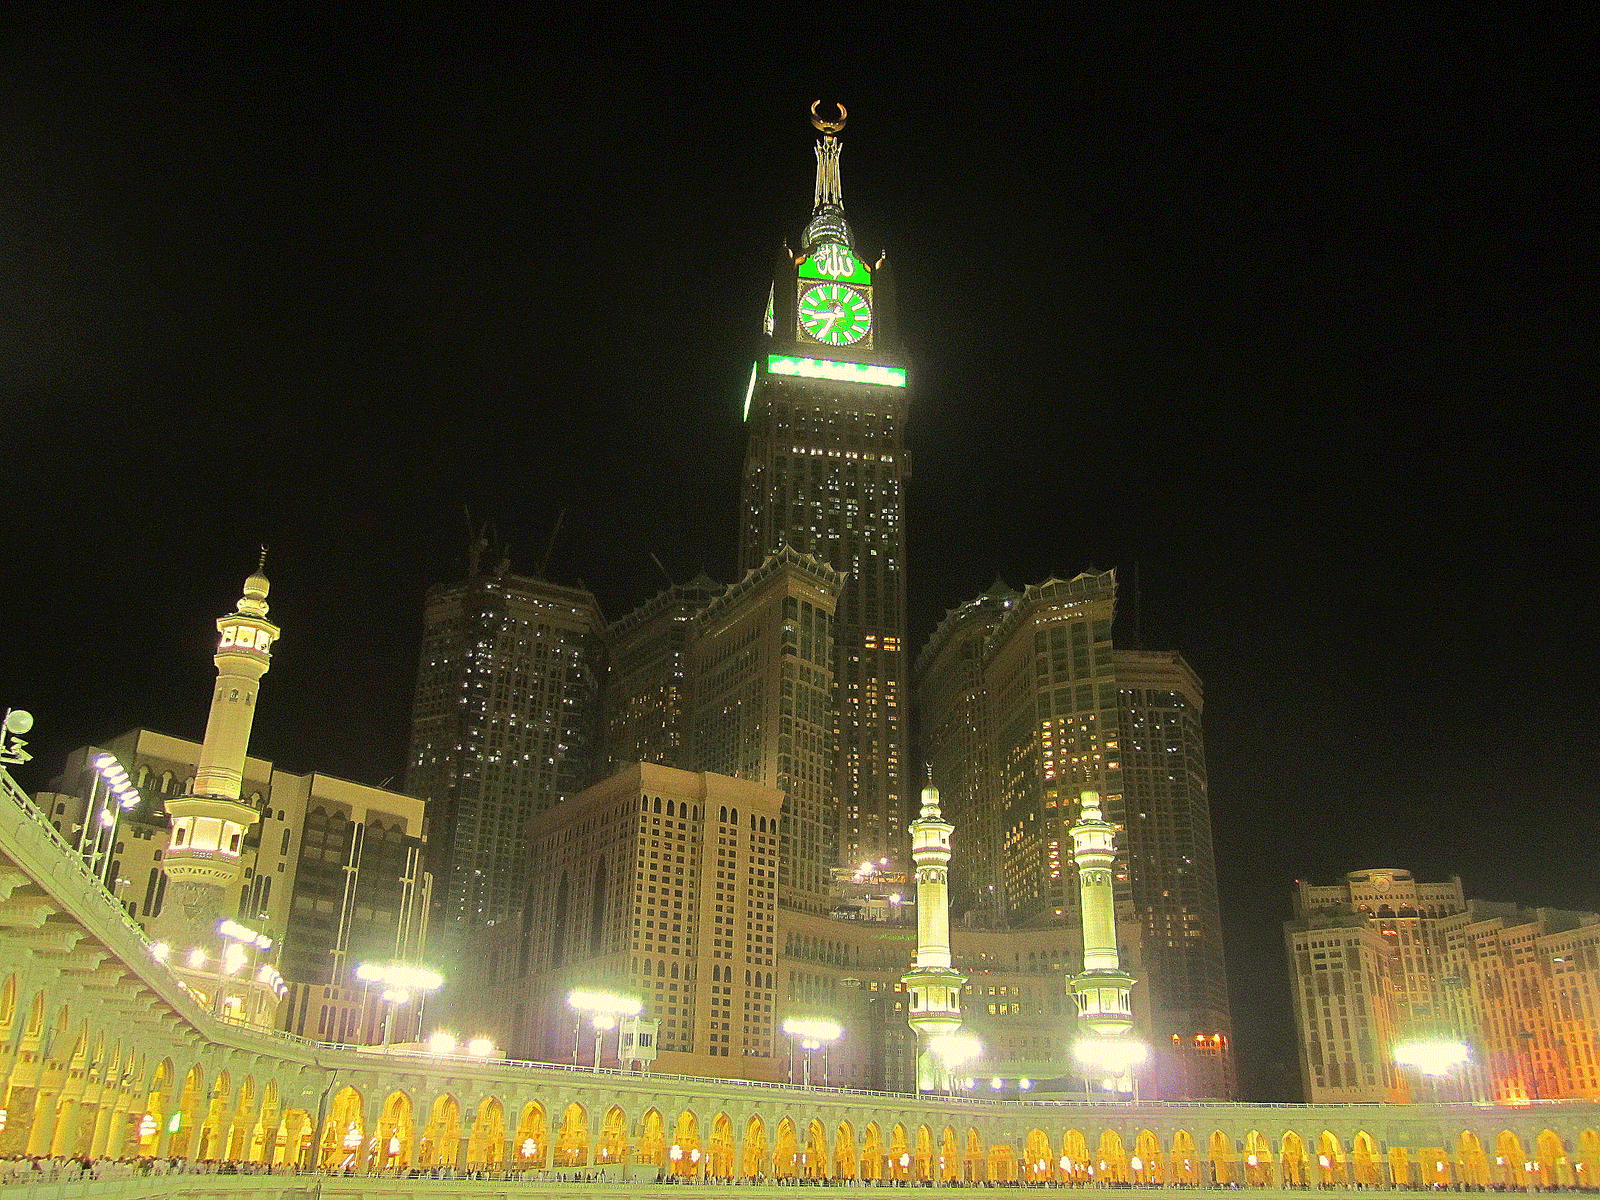 Mecca: Untold story of the biggest clock ever built